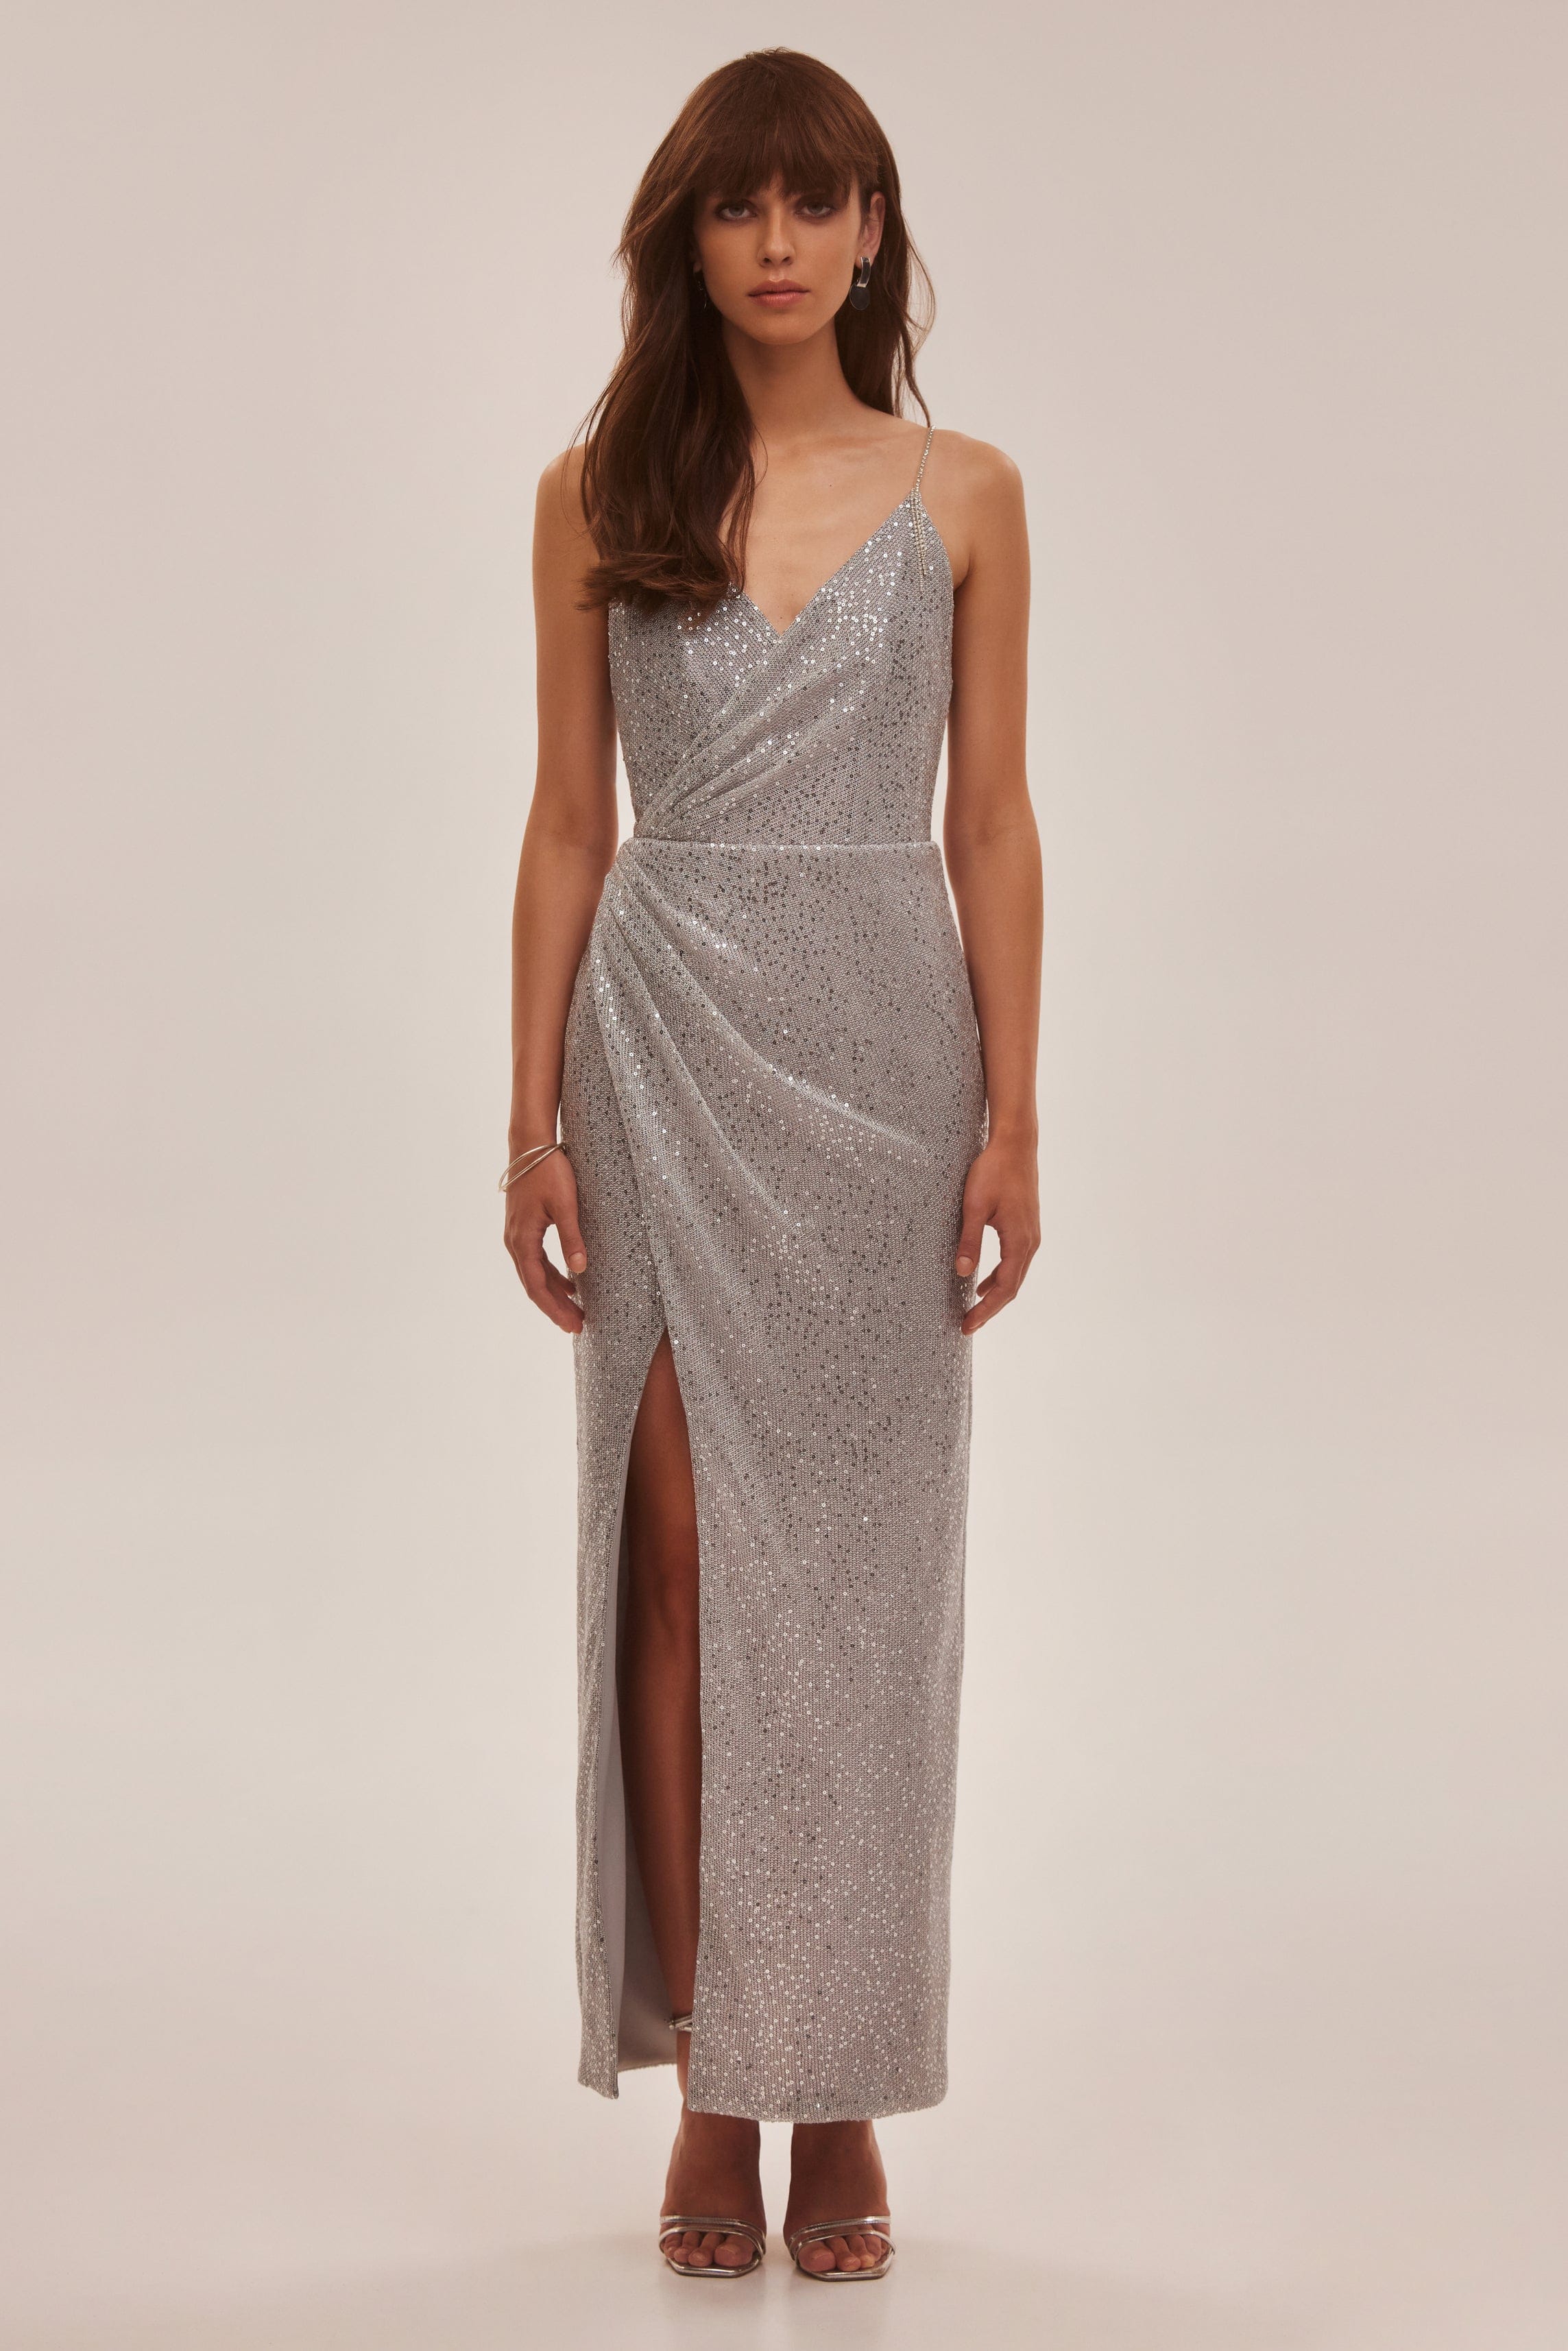 SHEIN USA  Short sparkly dresses, Silver cocktail dress, Glitter dress  outfit